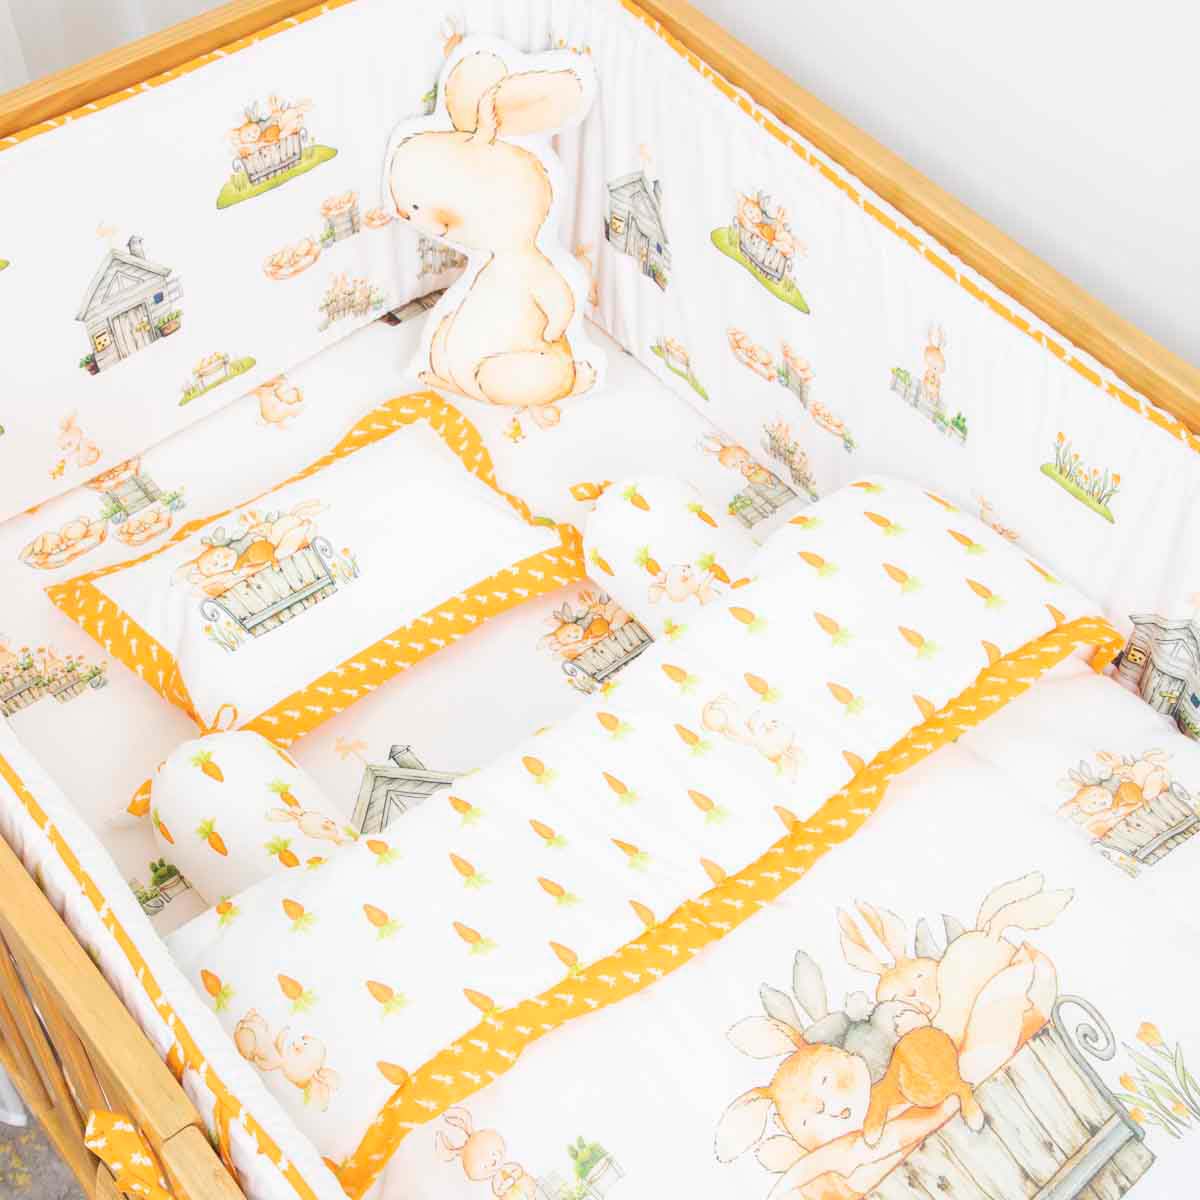 Mr. Marshmallow the Bunny - Cot Bedding Set with Bumper